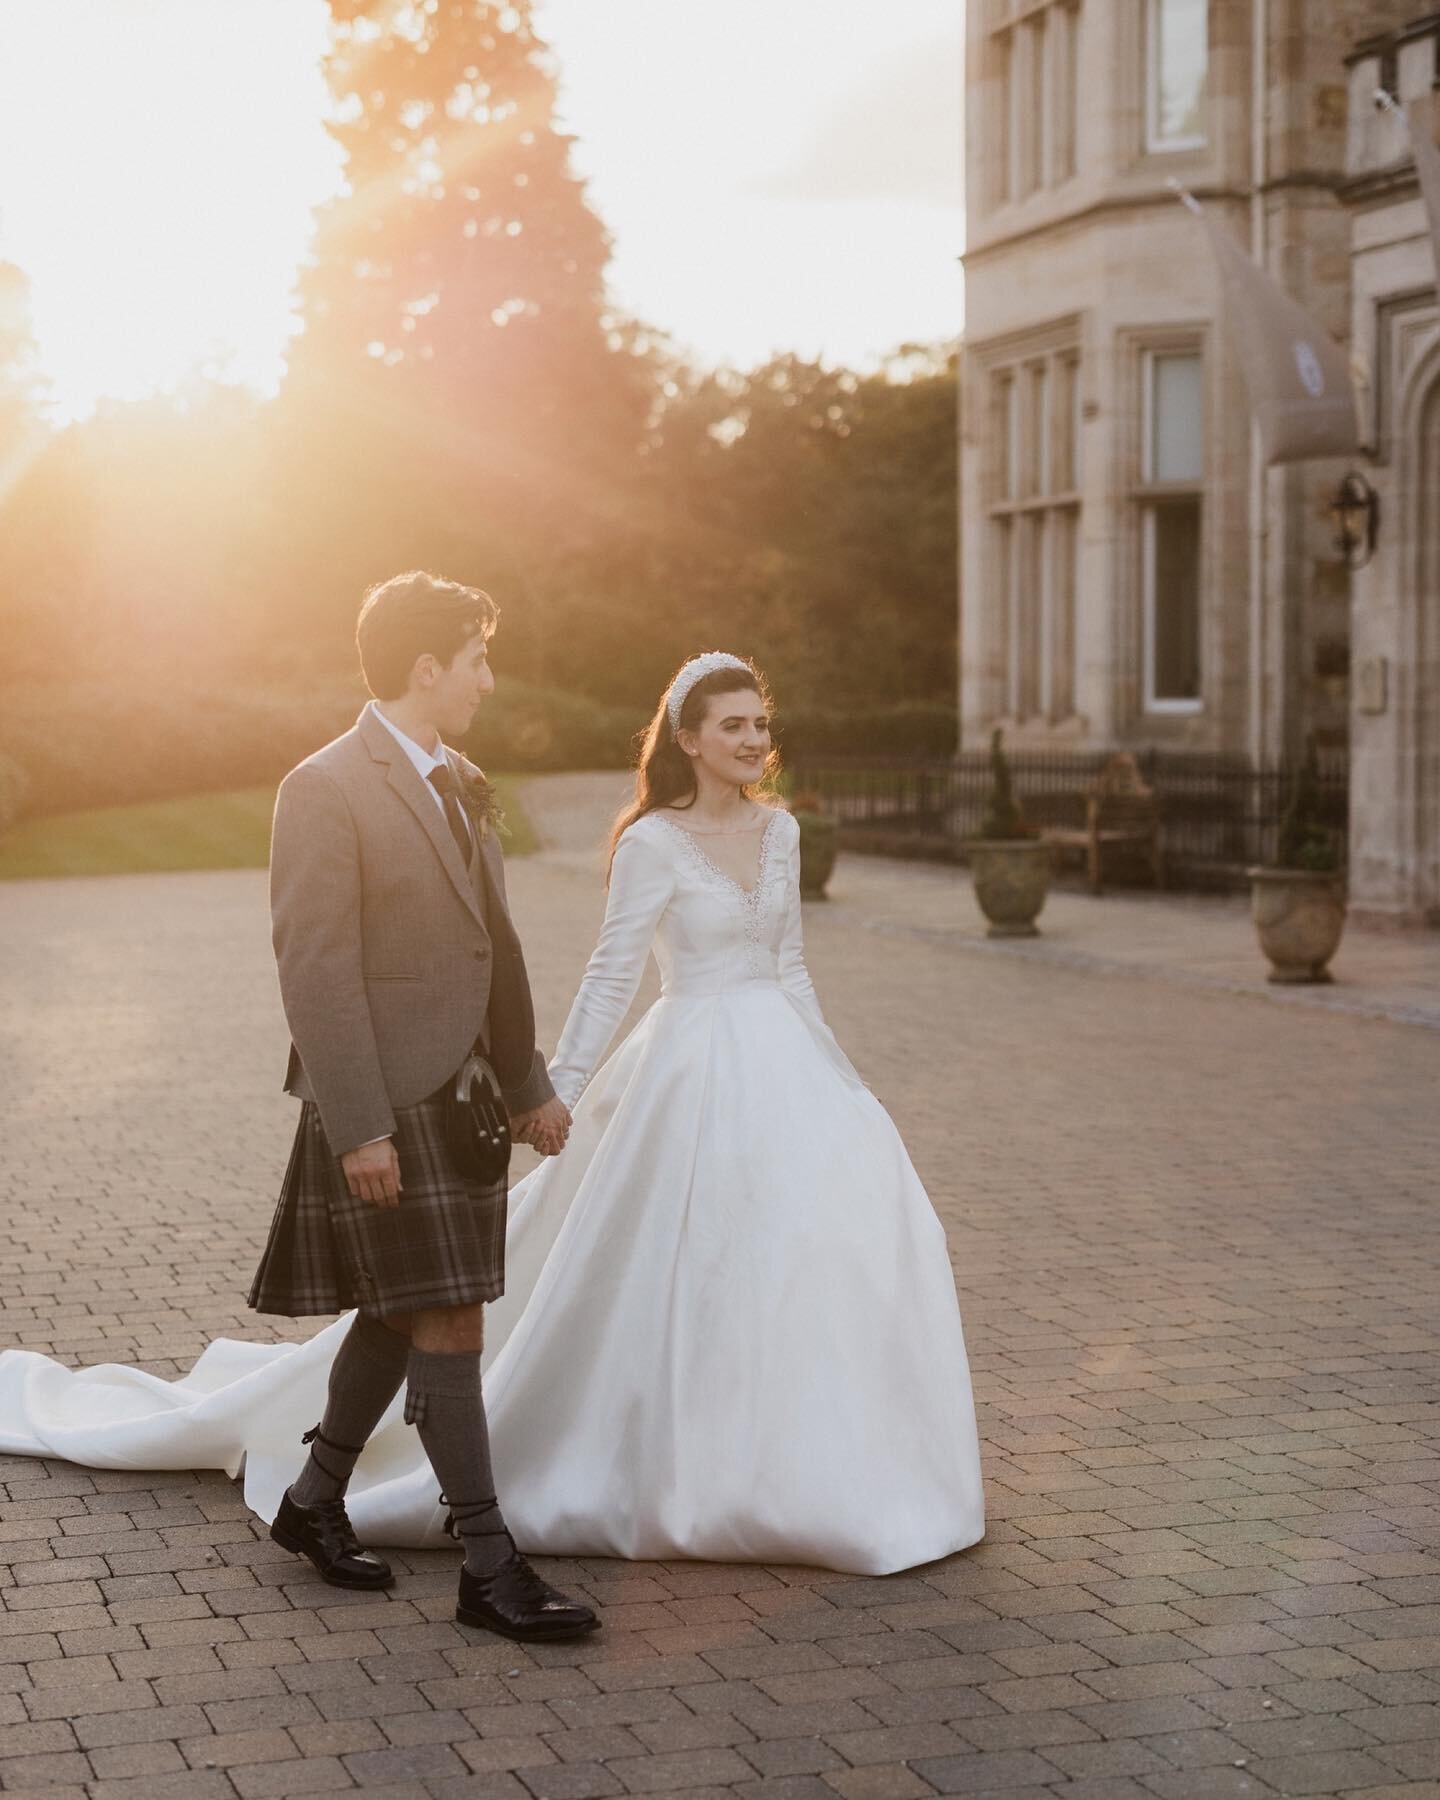 Almost 6 months ago, Crossbasket castle set the stage for Pauline and Cameron&rsquo;s wedding. Here&rsquo;s another glimpse at the moments I captured.
.
#weddingphotography #weddingdress #scottishweddings #lovestories #crossbasketcastle #crossbasketc